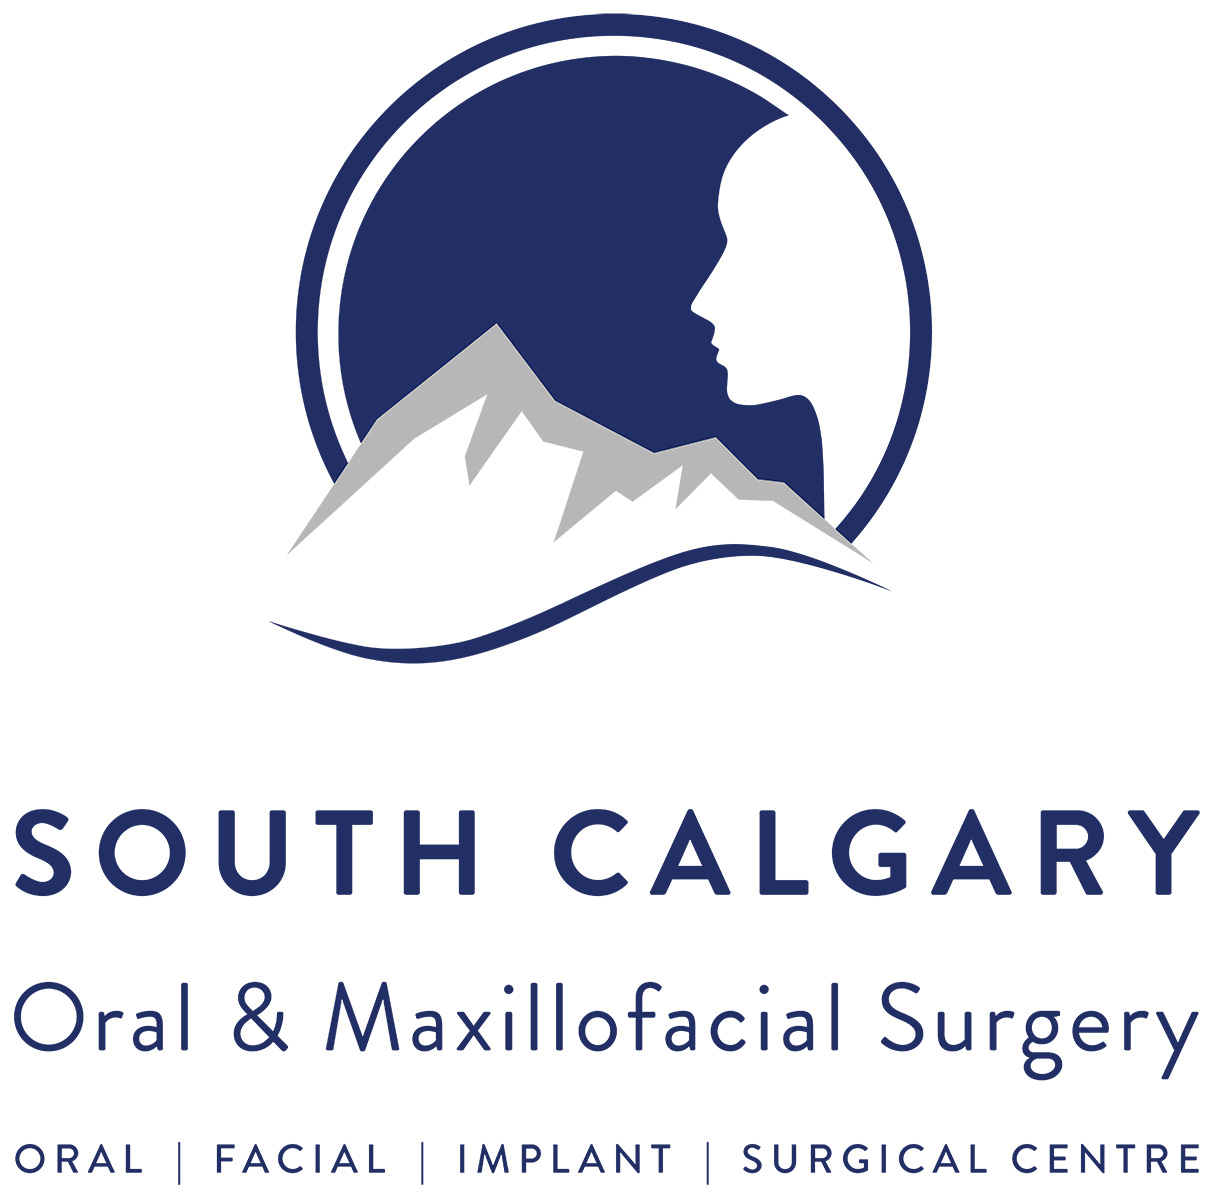 SCOMS logo showing strong facial structure and indicating they do dental implant care